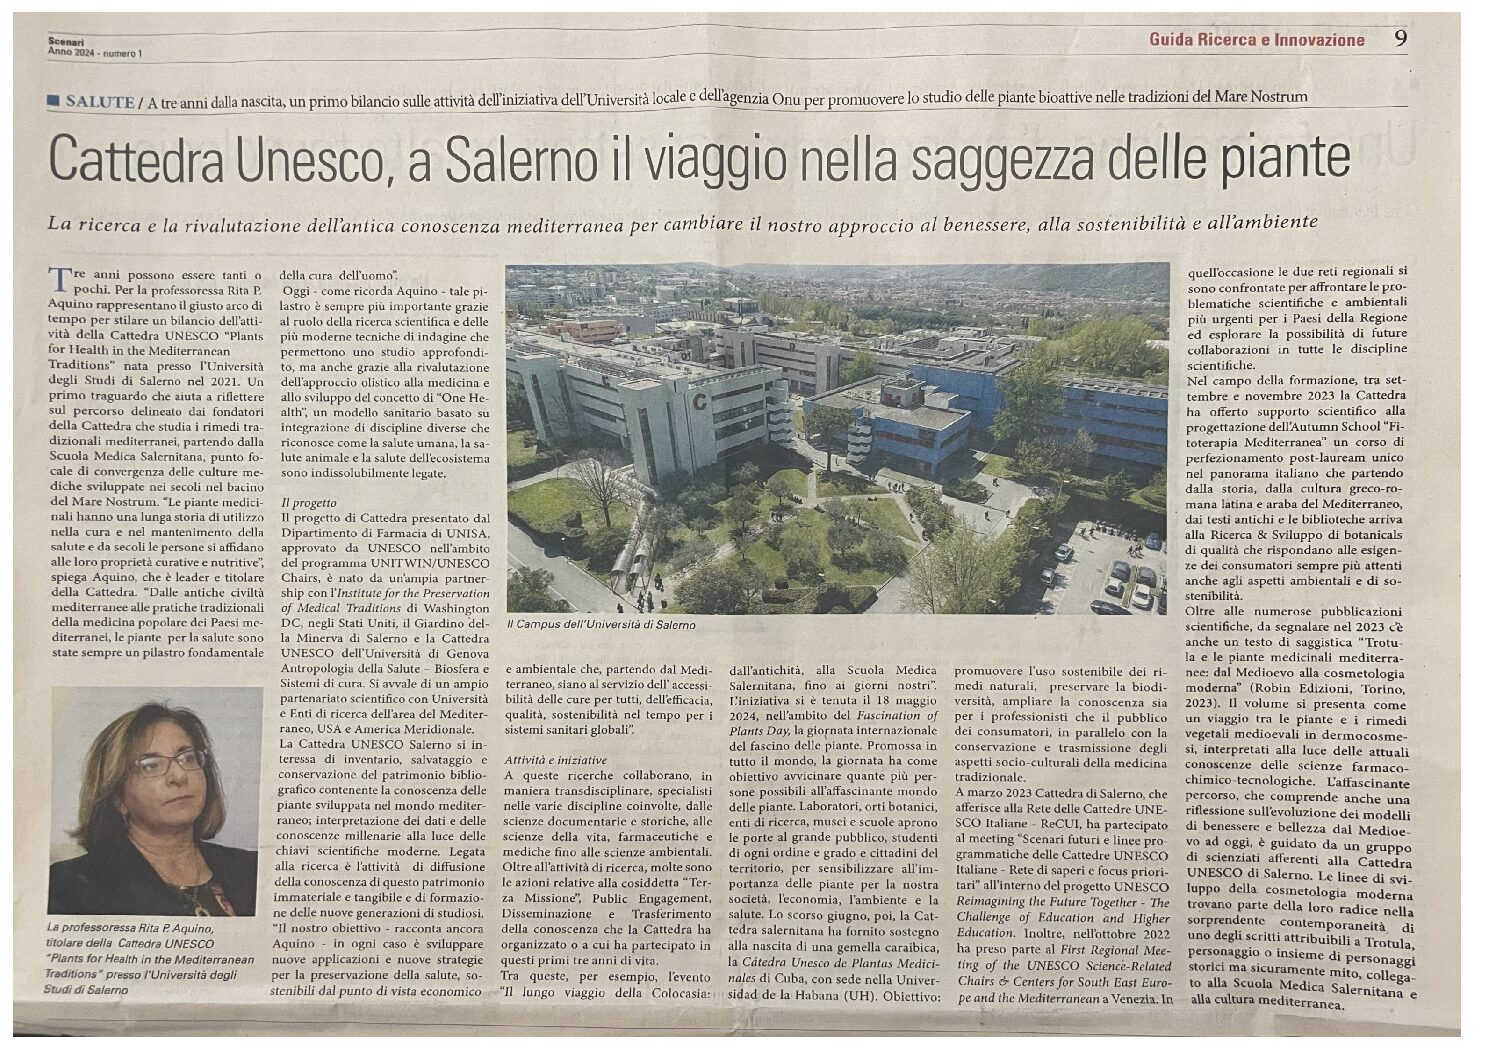 January 29th 2024 – In Salerno, a long journey in the plants’ wisdom  …… – An interview to Rita Aquino in Sole24ore.